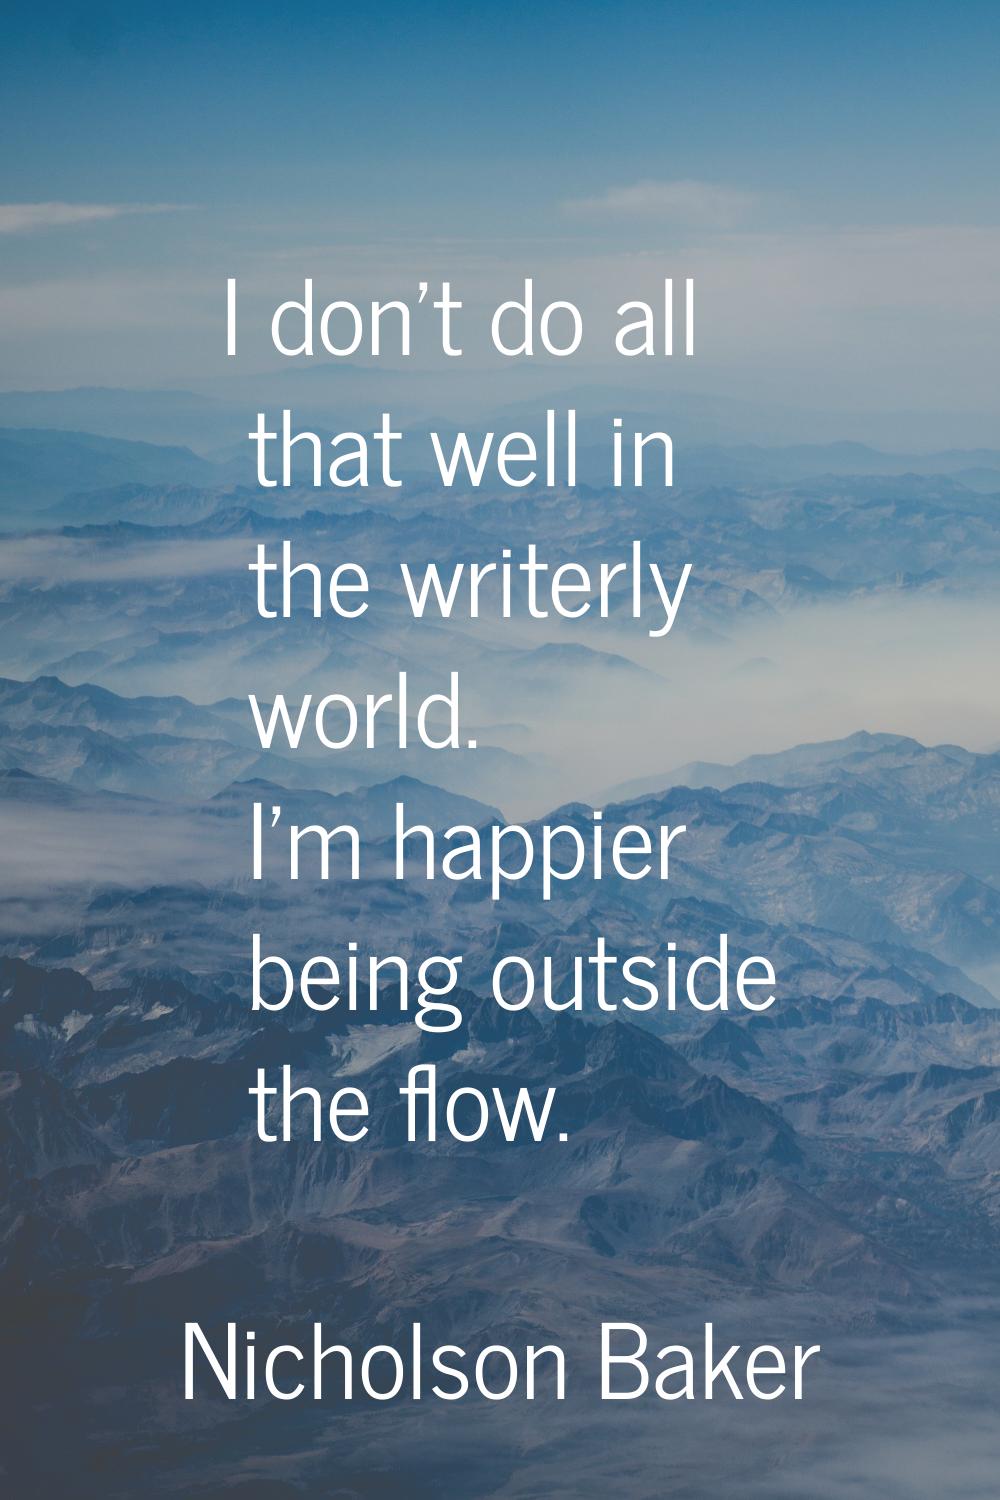 I don't do all that well in the writerly world. I'm happier being outside the flow.